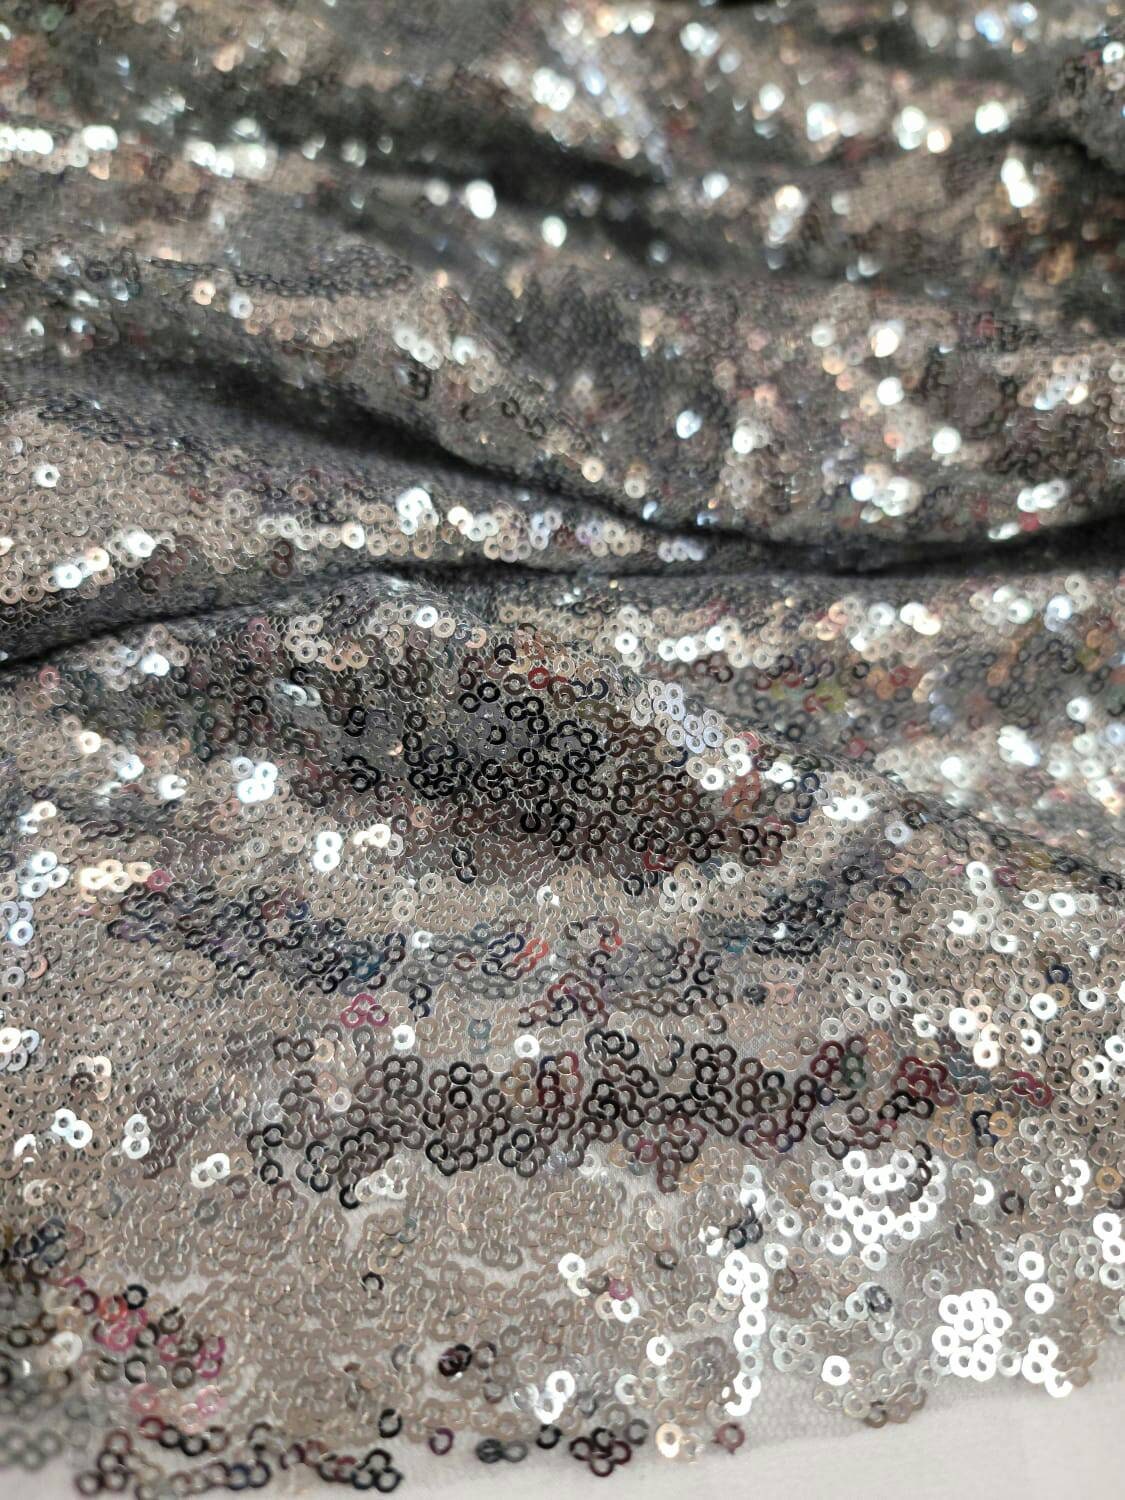 Silver Sequin Stretch Fabric Sold by the Yard Dancer Clothing Decoration Draping Clothing Fashion Prom Dress Bridal Gun Metal